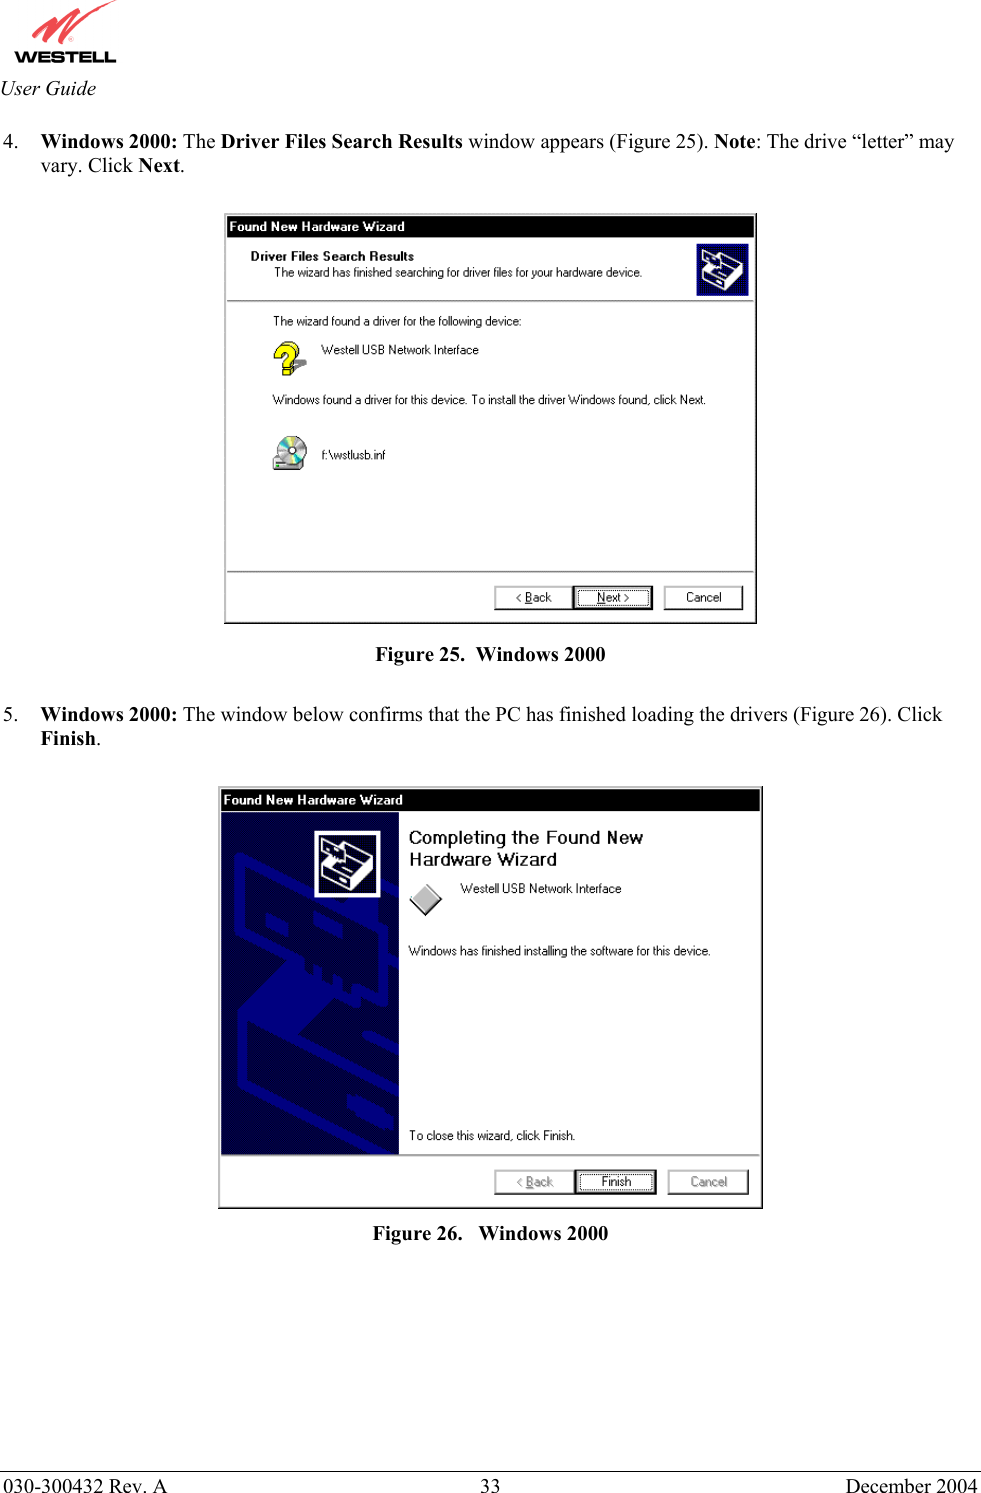       030-300432 Rev. A  33 December 2004  User Guide 4.  Windows 2000: The Driver Files Search Results window appears (Figure 25). Note: The drive “letter” may vary. Click Next.   Figure 25.  Windows 2000  5.  Windows 2000: The window below confirms that the PC has finished loading the drivers (Figure 26). Click Finish.   Figure 26.   Windows 2000        